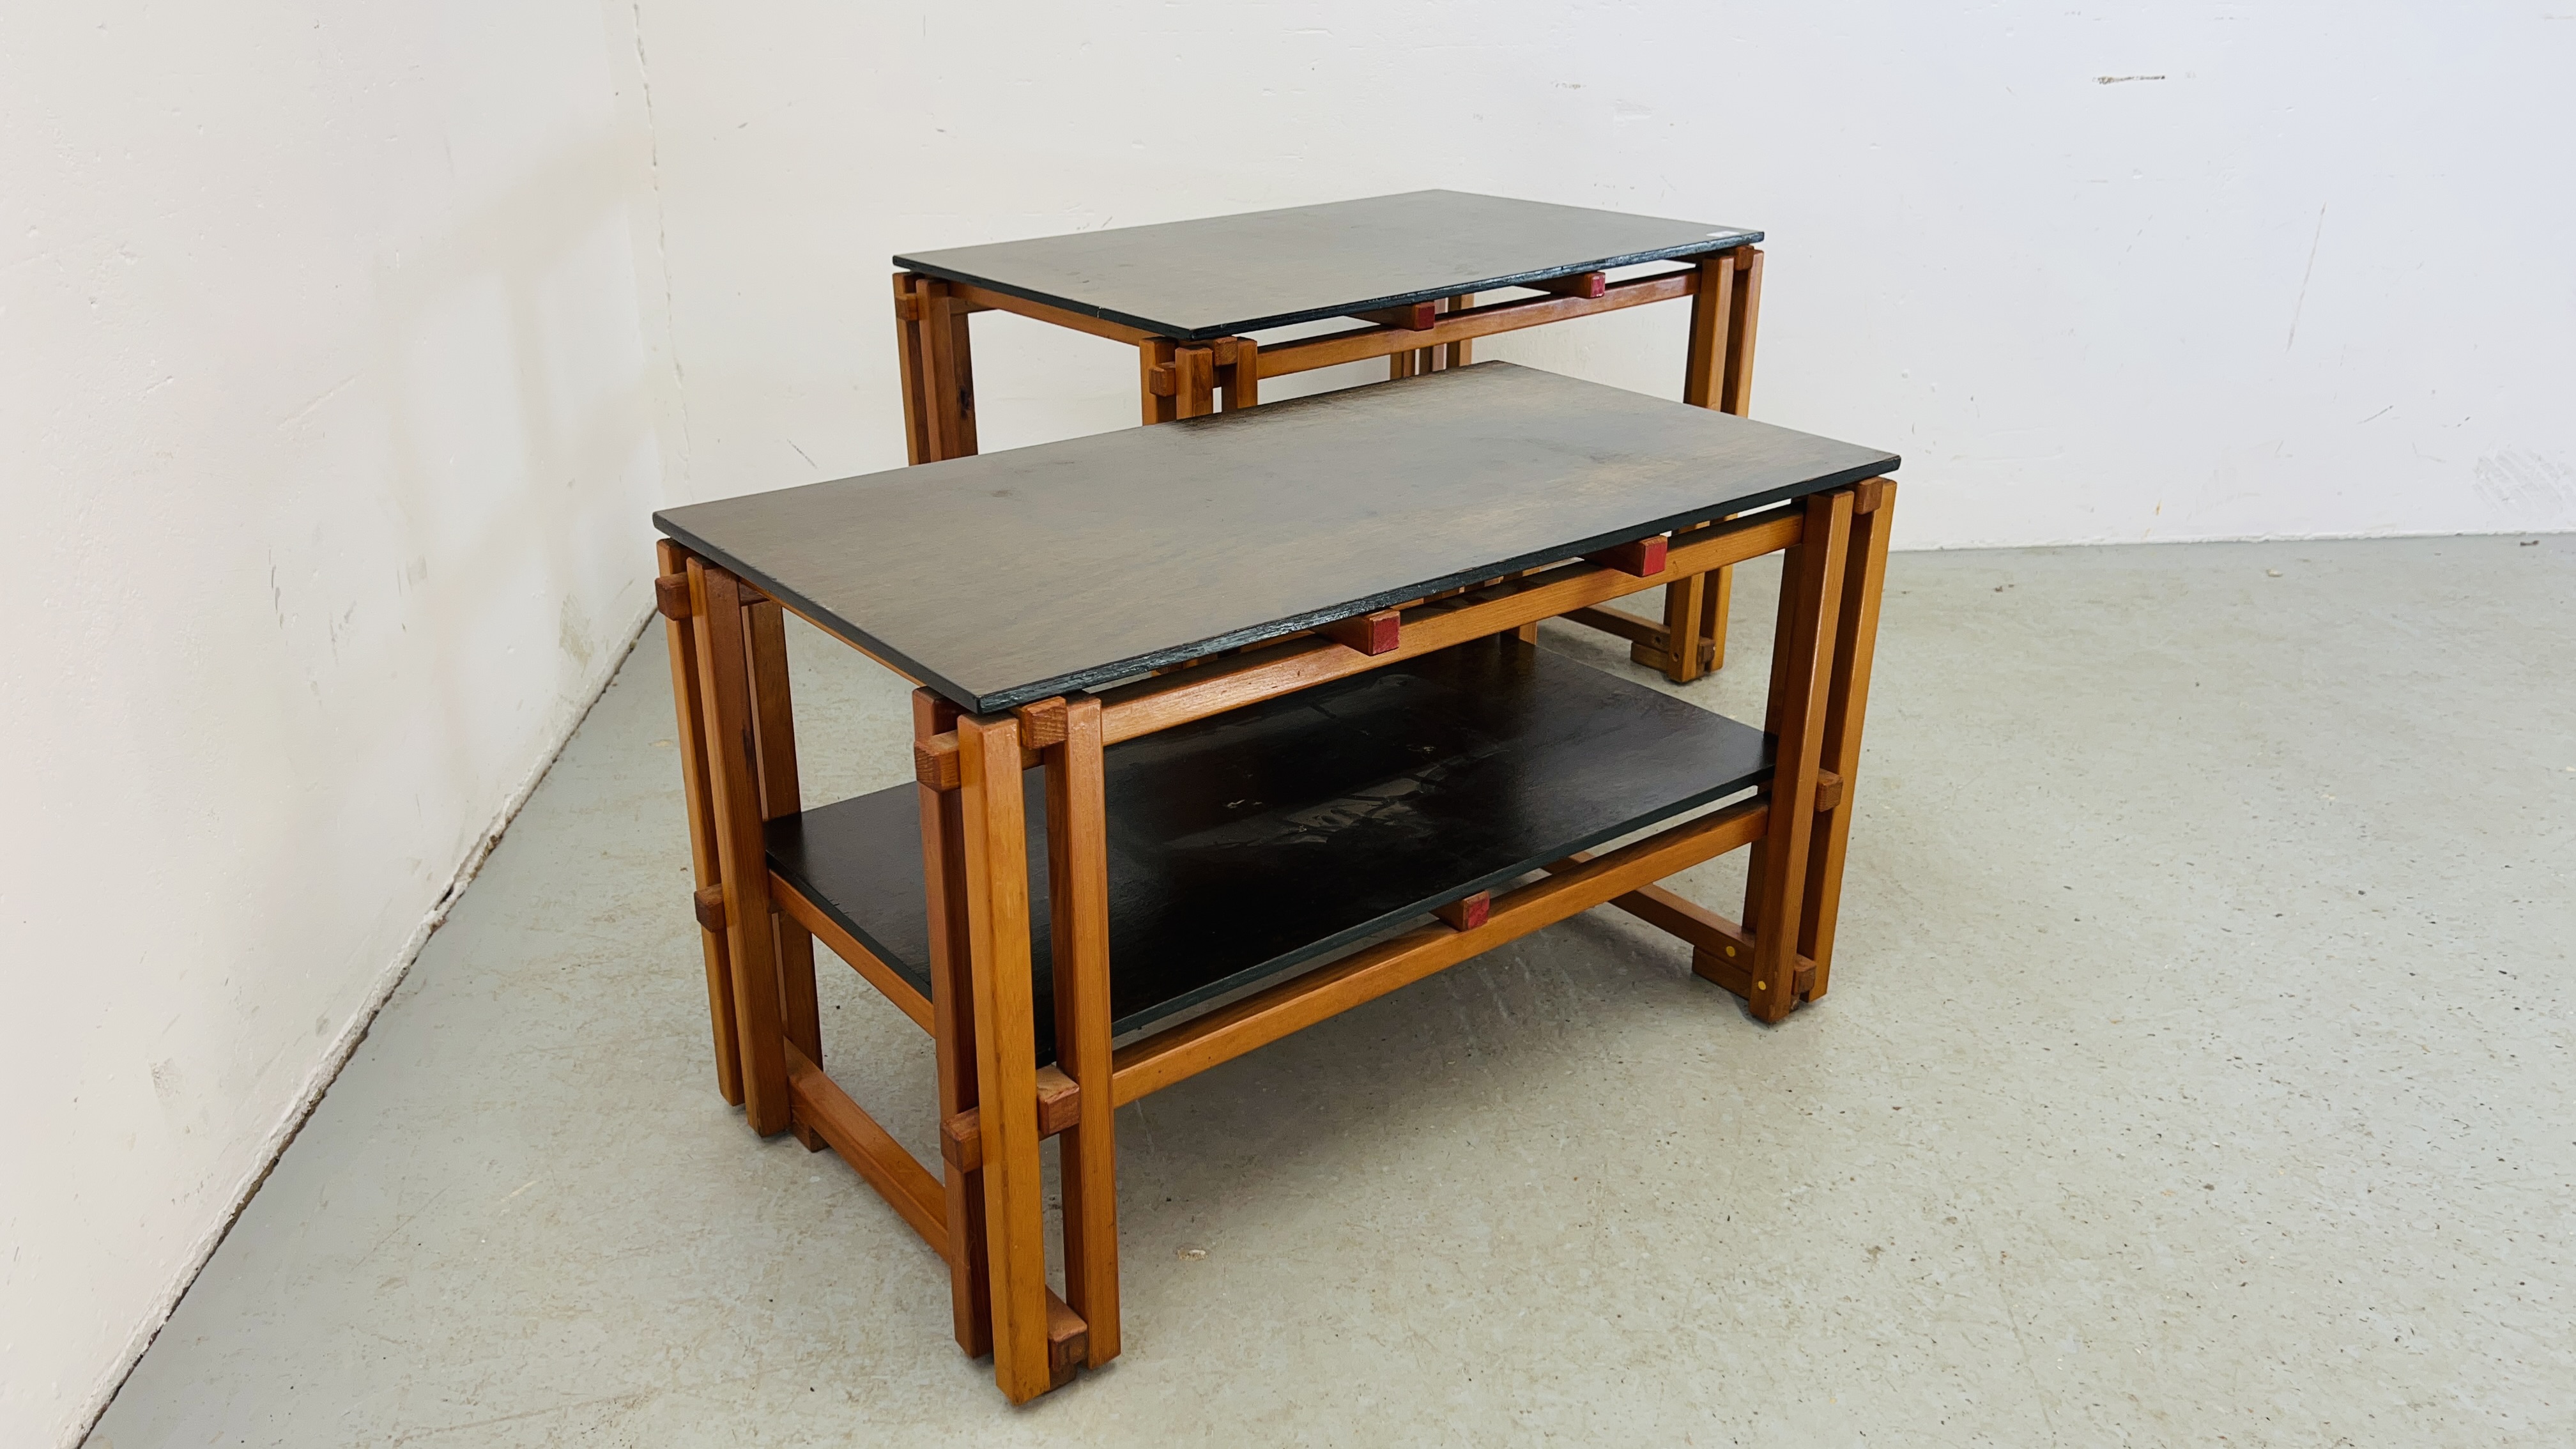 TWO BESPOKE HANDMADE OCCASIONAL TABLES LENGTH 85CM. HEIGHT 55CM. DEPTH 56CM. AND LENGTH 85CM. - Image 7 of 7